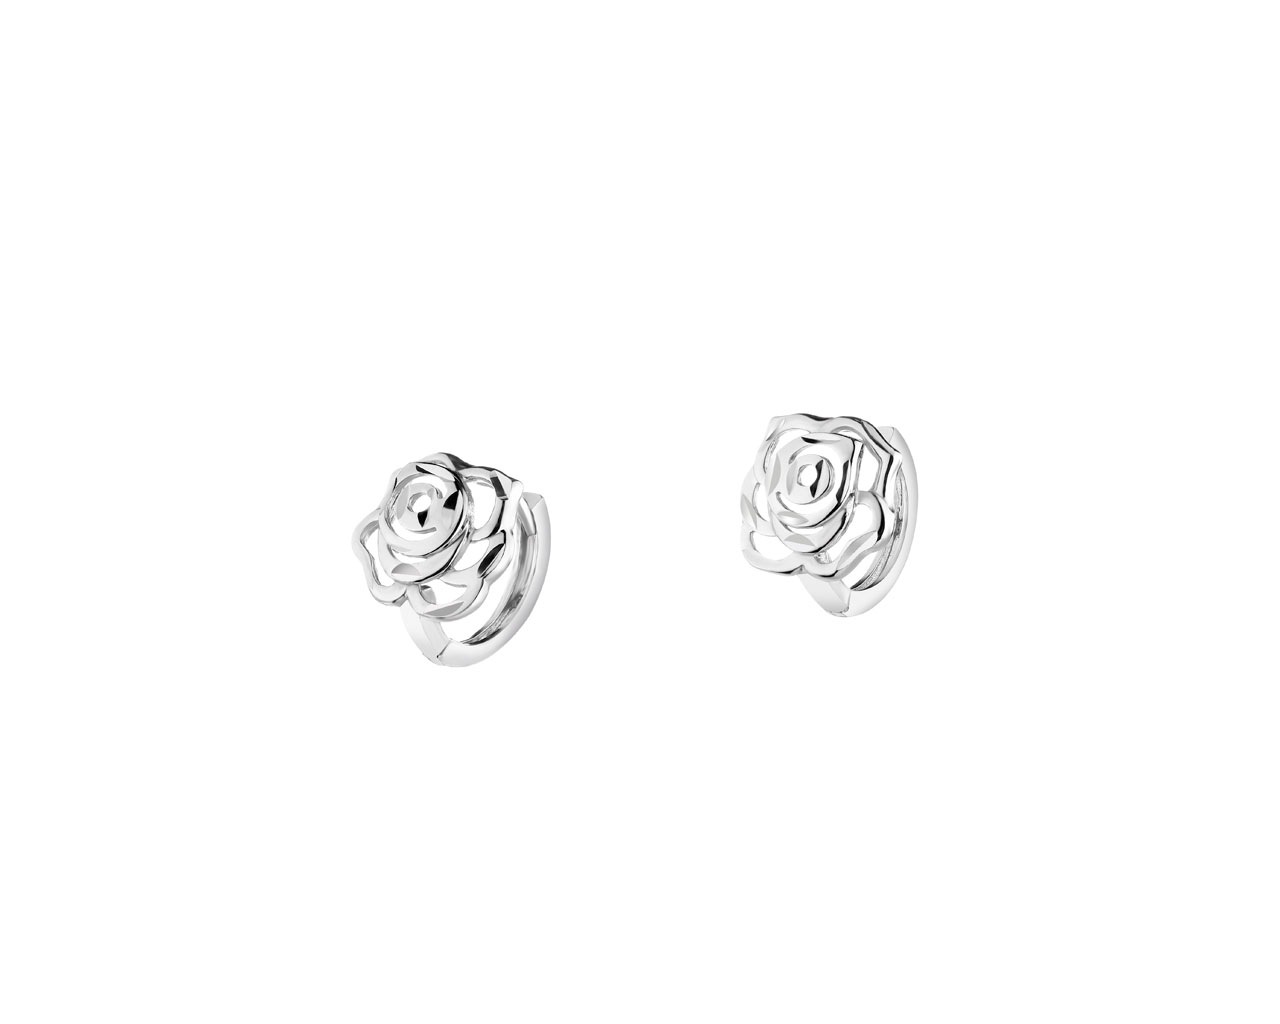 750 Rhodium-Plated White Gold Earrings 